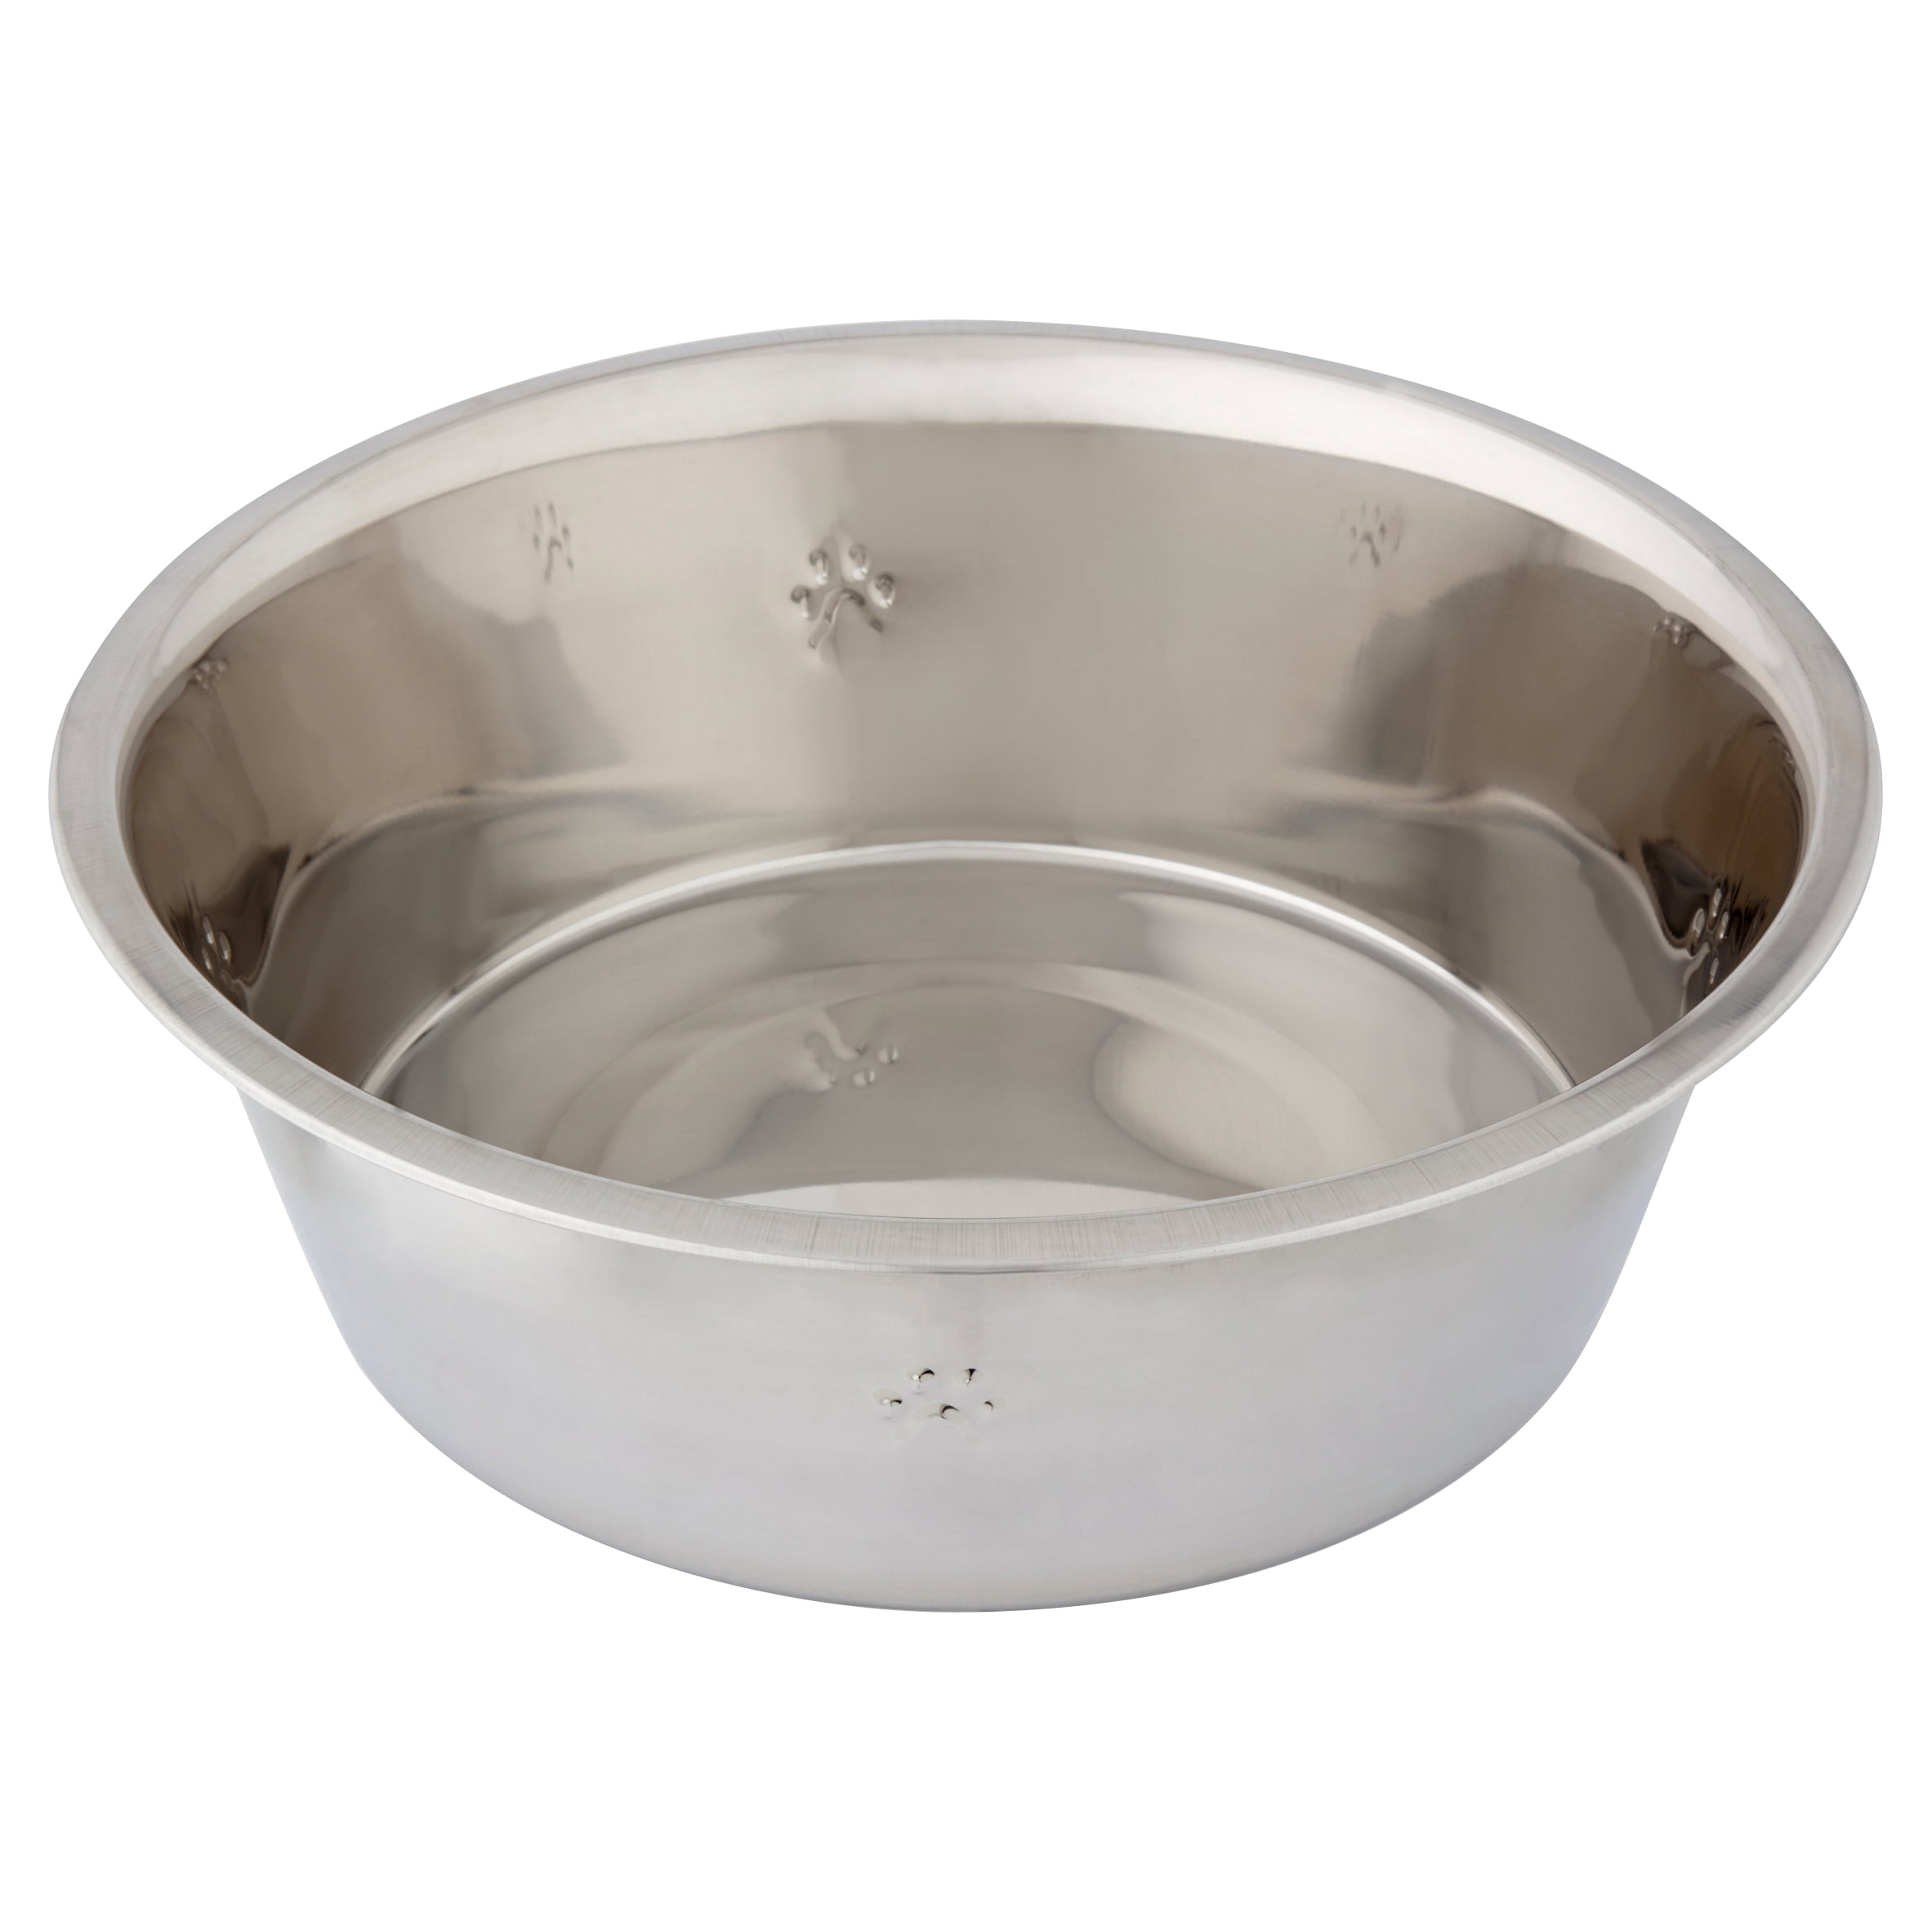 Vibrant Life Stainless Steel Dog Bowl with Paws, X-Large - Walmart.com Large Stainless Steel Dog Water Bowl